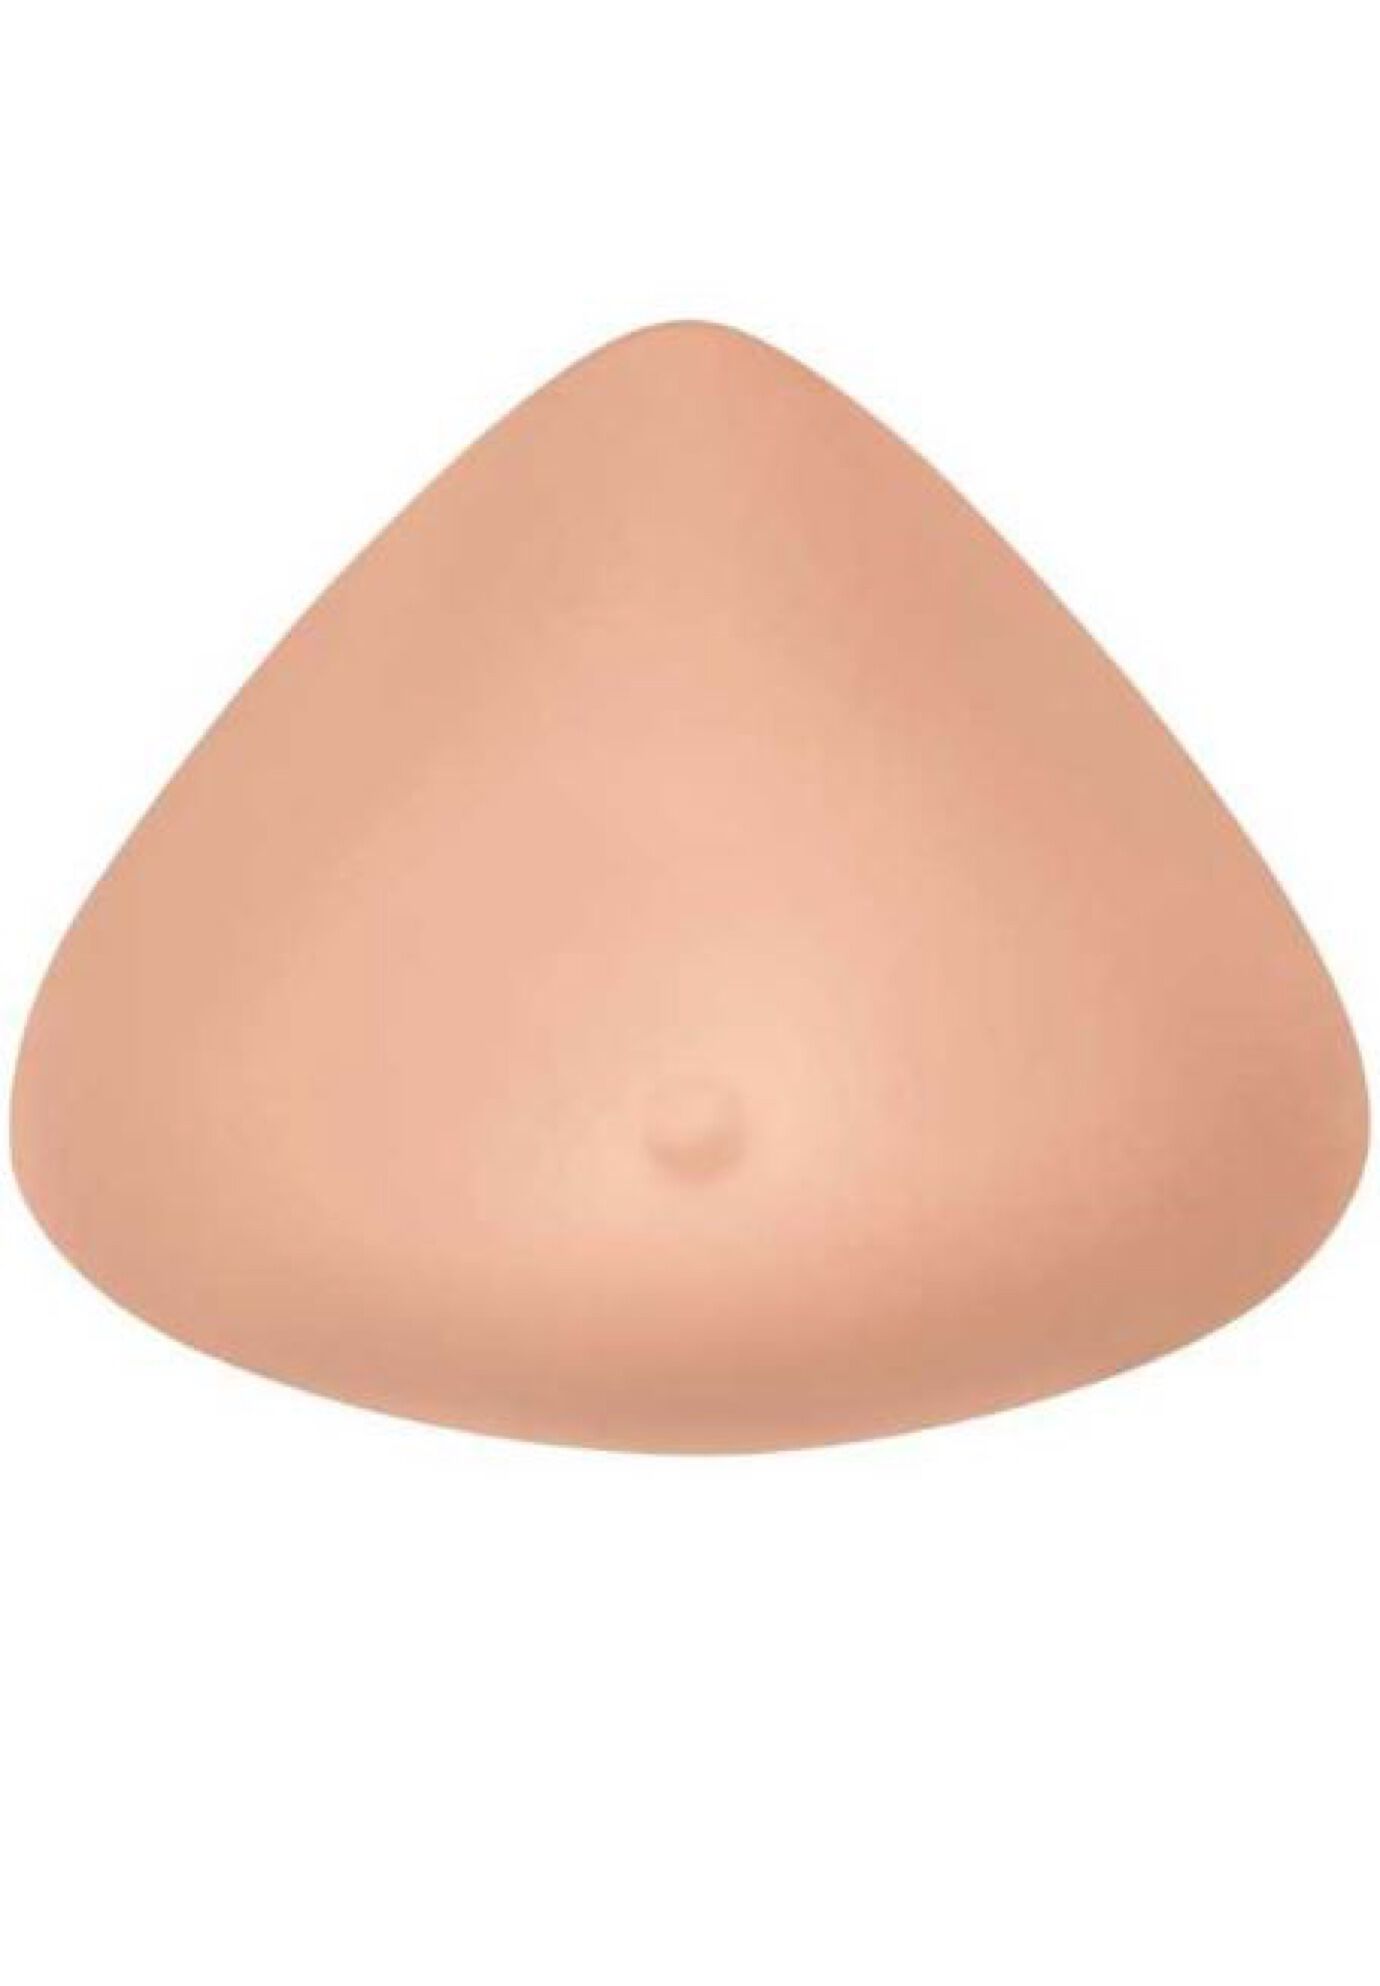 Plus Size Women's Amoena Essential Breast Forms Essential Light 2S - 442 by Amoena in Ivory (Size 16)